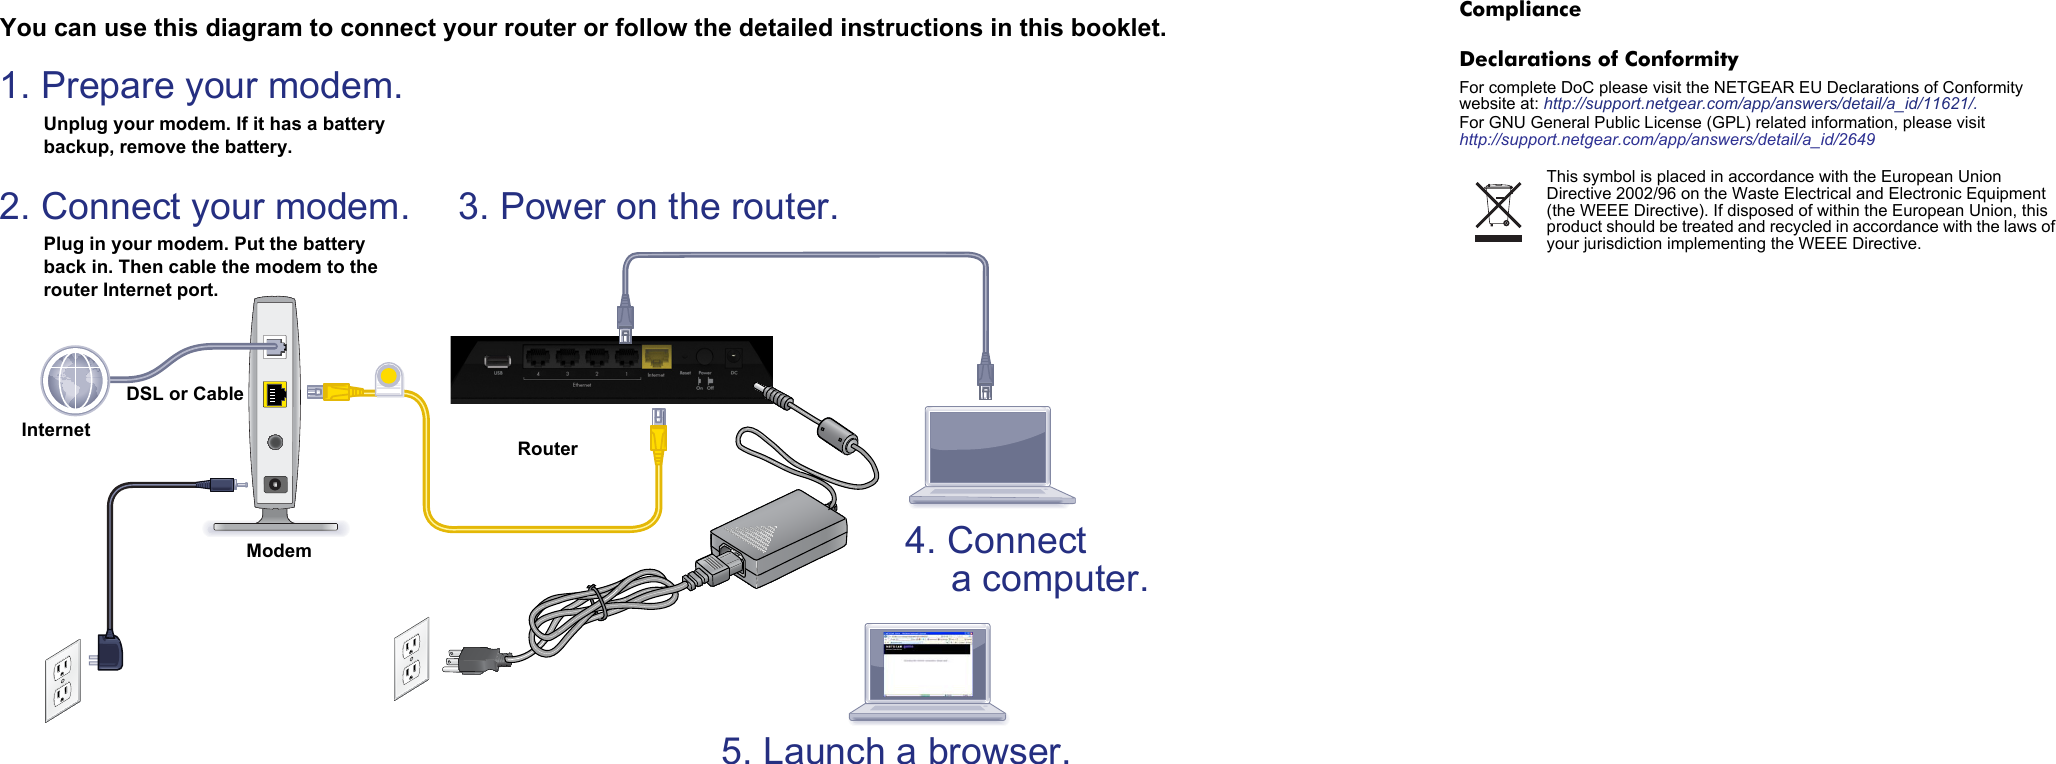 You can use this diagram to connect your router or follow the detailed instructions in this booklet.1. Prepare your modem.4. Connect 3. Power on the router.5. Launch a browser.2. Connect your modem.Unplug your modem. If it has a battery backup, remove the battery.Plug in your modem. Put the battery back in. Then cable the modem to the router Internet port. ModemInternetRouterDSL or Cablea computer.ComplianceDeclarations of ConformityFor complete DoC please visit the NETGEAR EU Declarations of Conformity website at: http://support.netgear.com/app/answers/detail/a_id/11621/. For GNU General Public License (GPL) related information, please visit http://support.netgear.com/app/answers/detail/a_id/2649This symbol is placed in accordance with the European Union Directive 2002/96 on the Waste Electrical and Electronic Equipment (the WEEE Directive). If disposed of within the European Union, this product should be treated and recycled in accordance with the laws of your jurisdiction implementing the WEEE Directive.